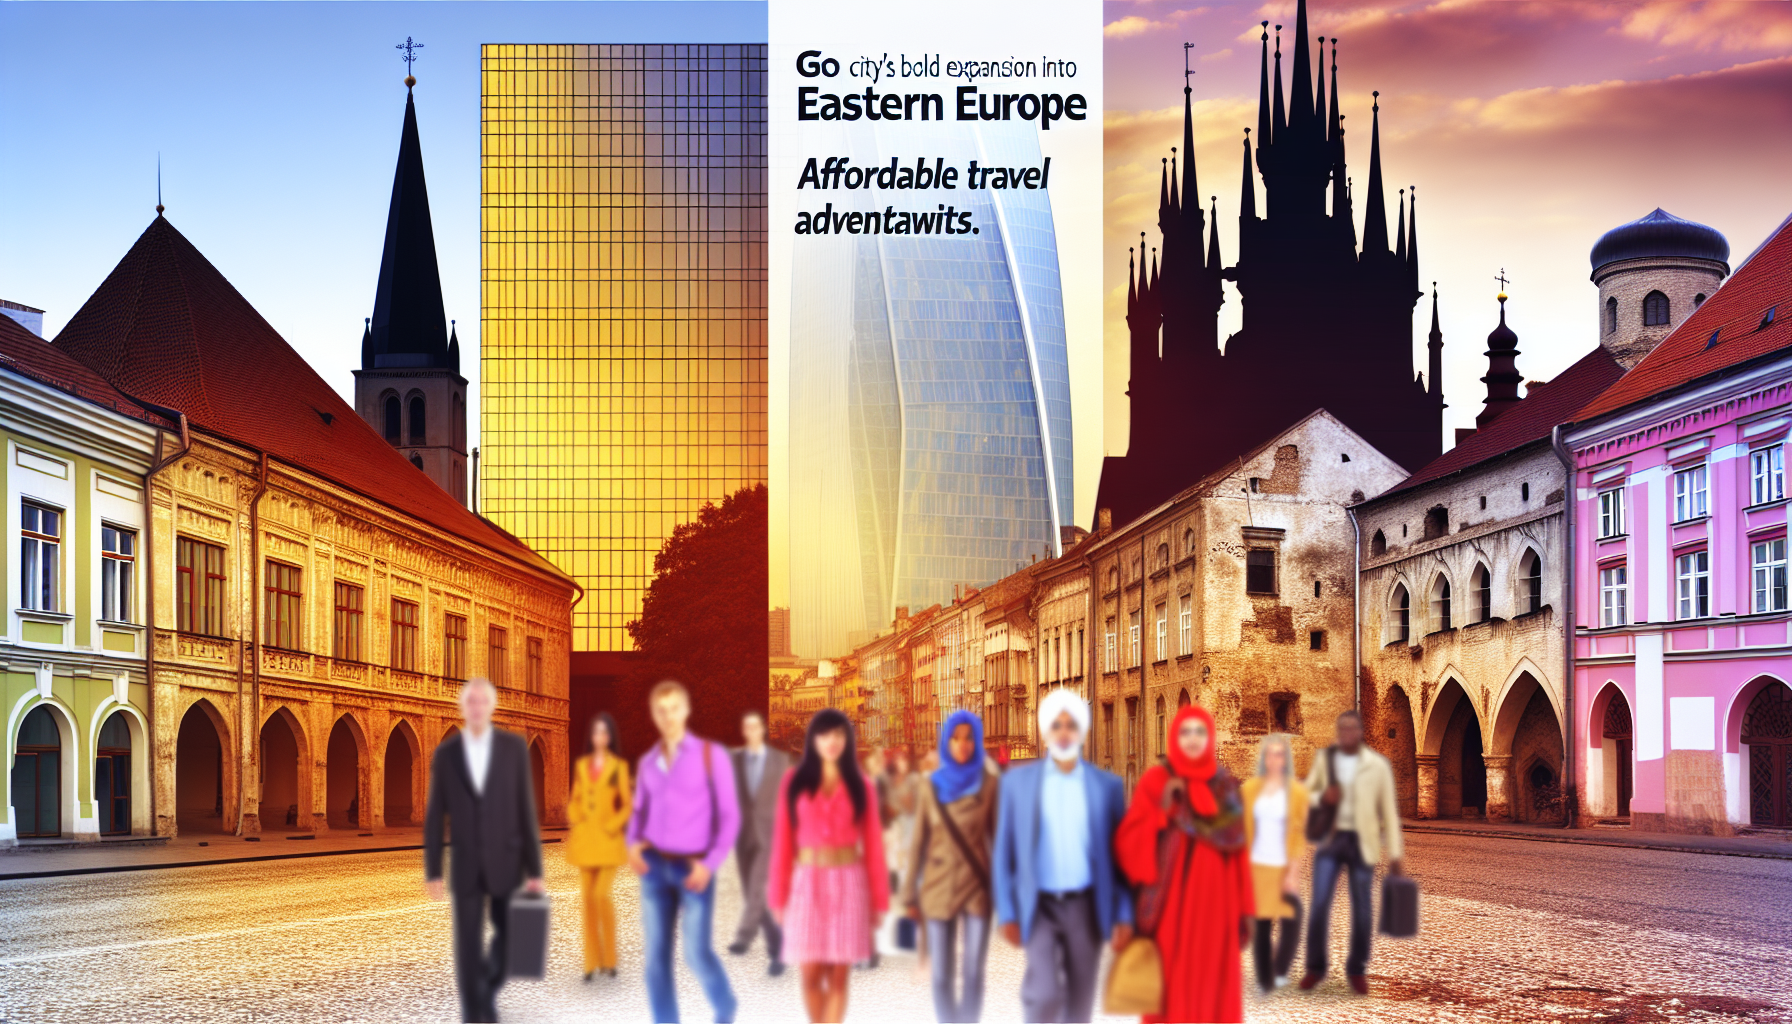 Go city’s bold expansion into eastern Europe: affordable travel adventure awaits